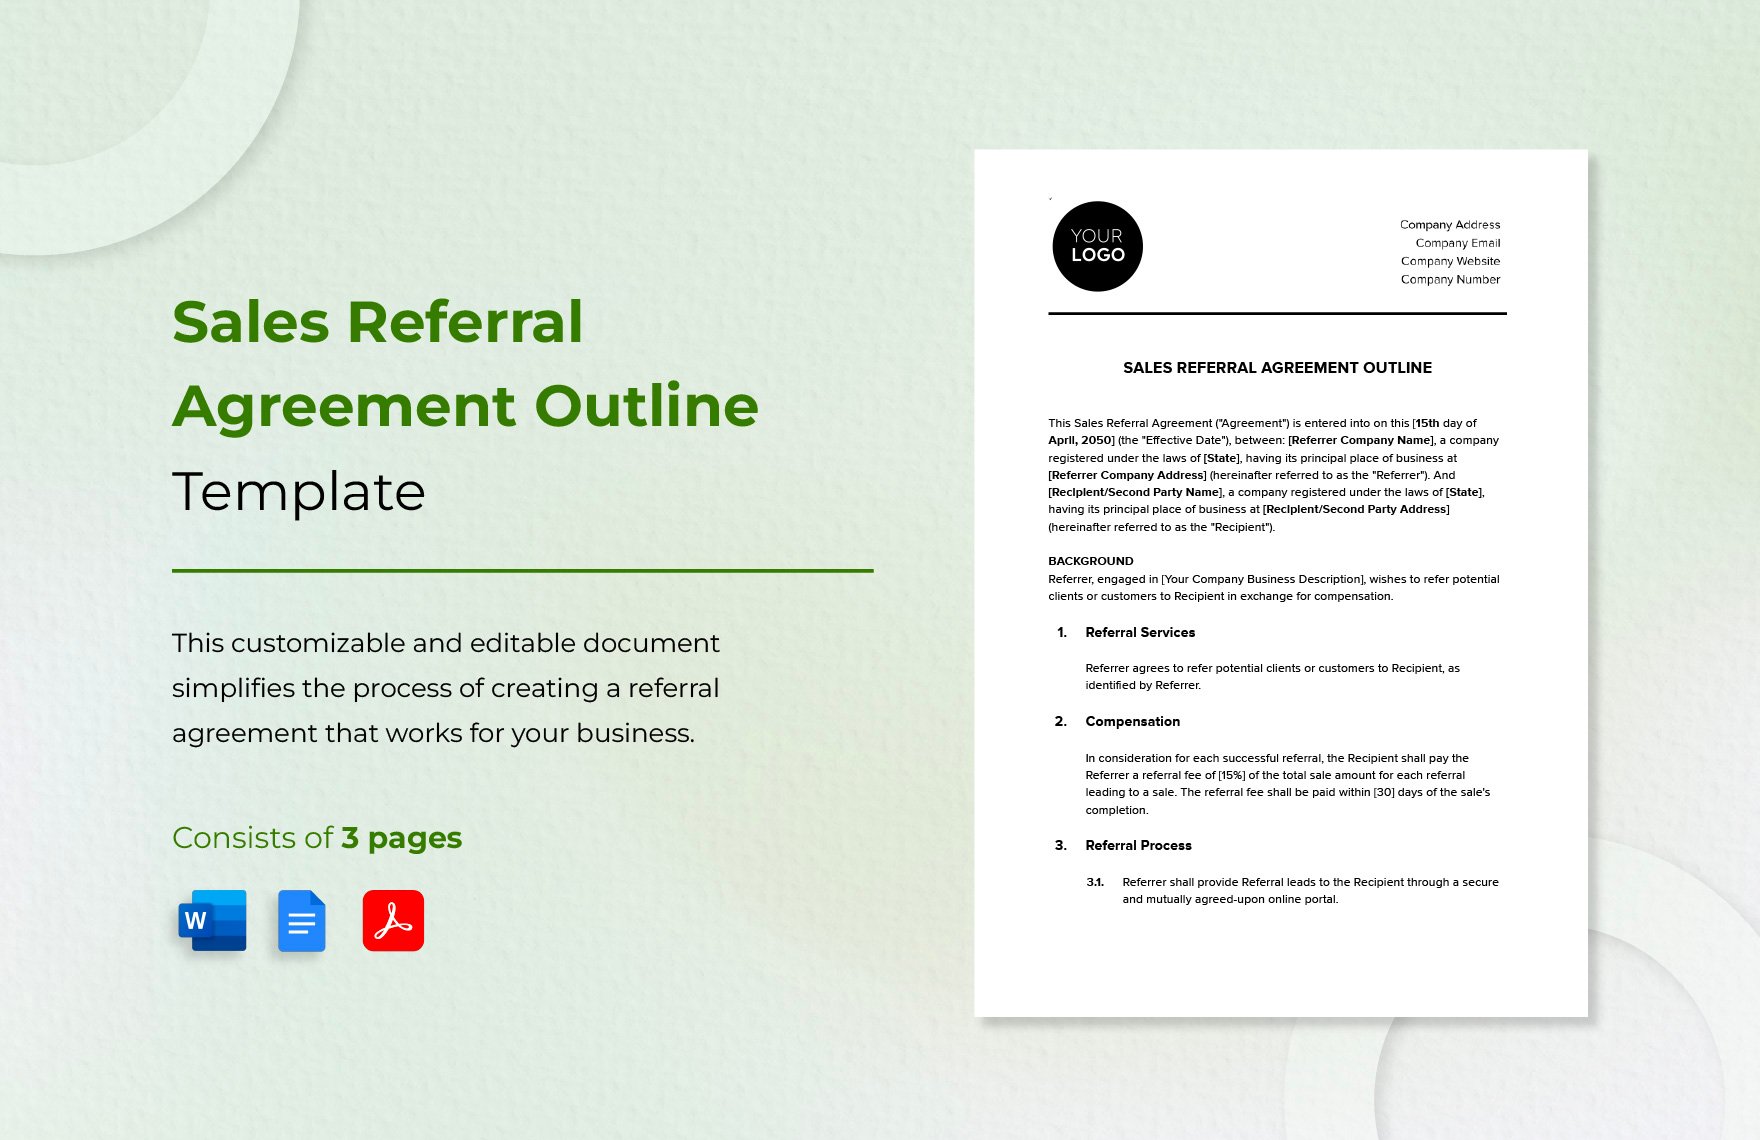 Sales Referral Agreement Outline Template